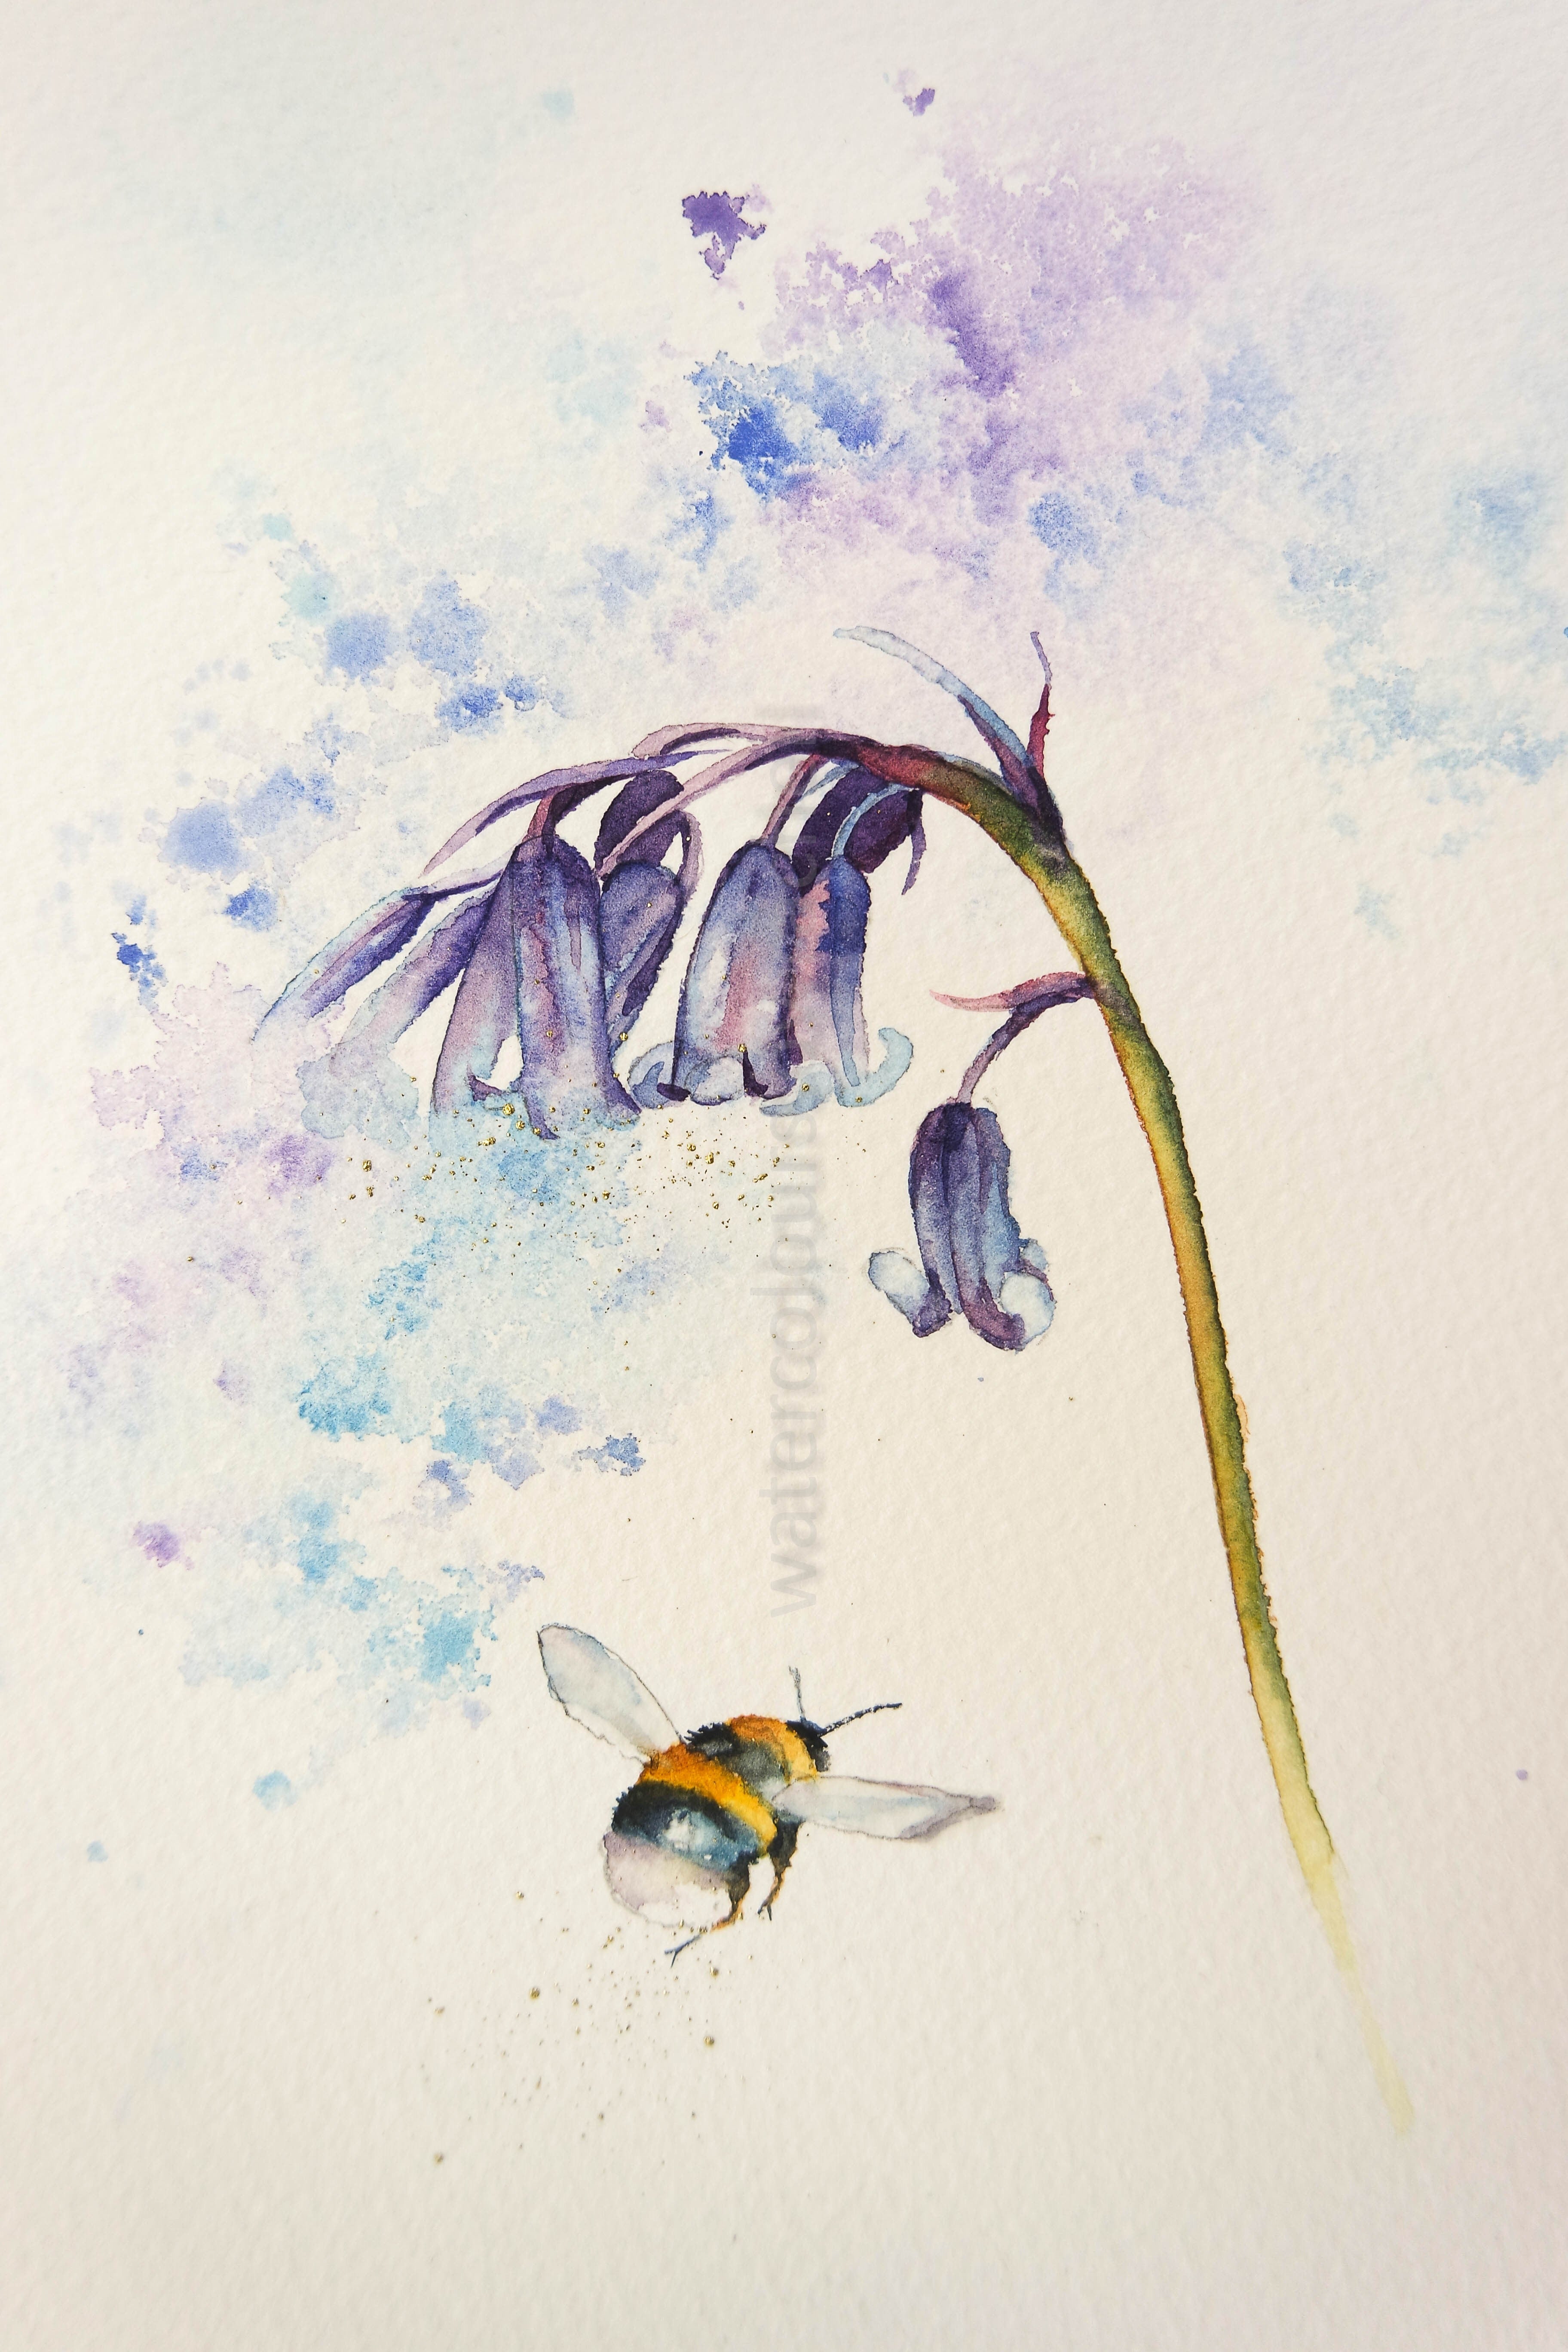 Bluebell Flower - Water Color Print